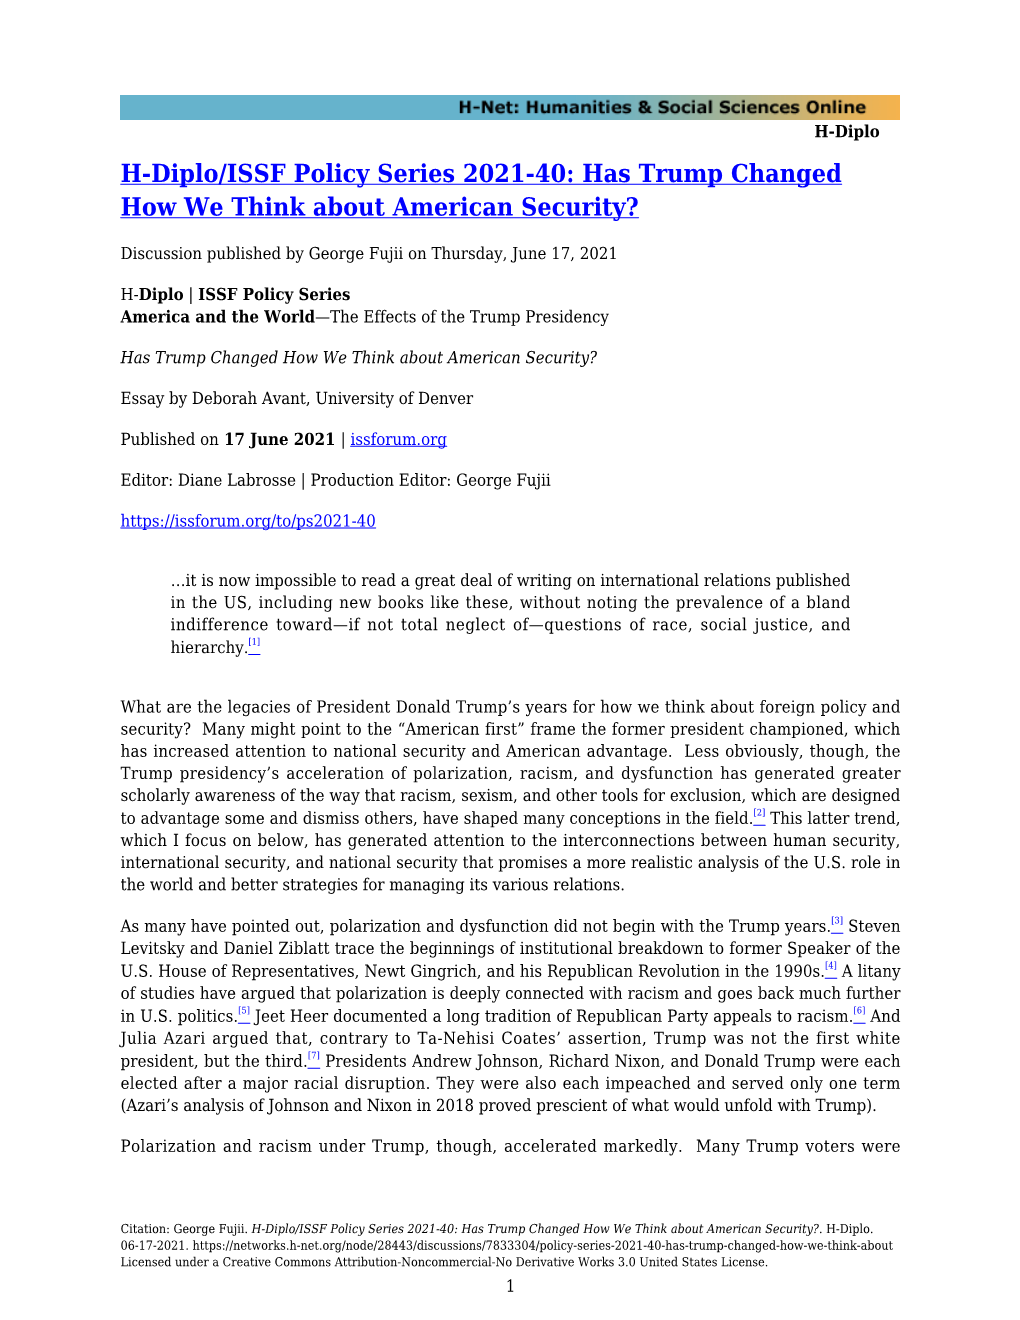 H-Diplo/ISSF Policy Series 2021-40: Has Trump Changed How We Think About American Security?